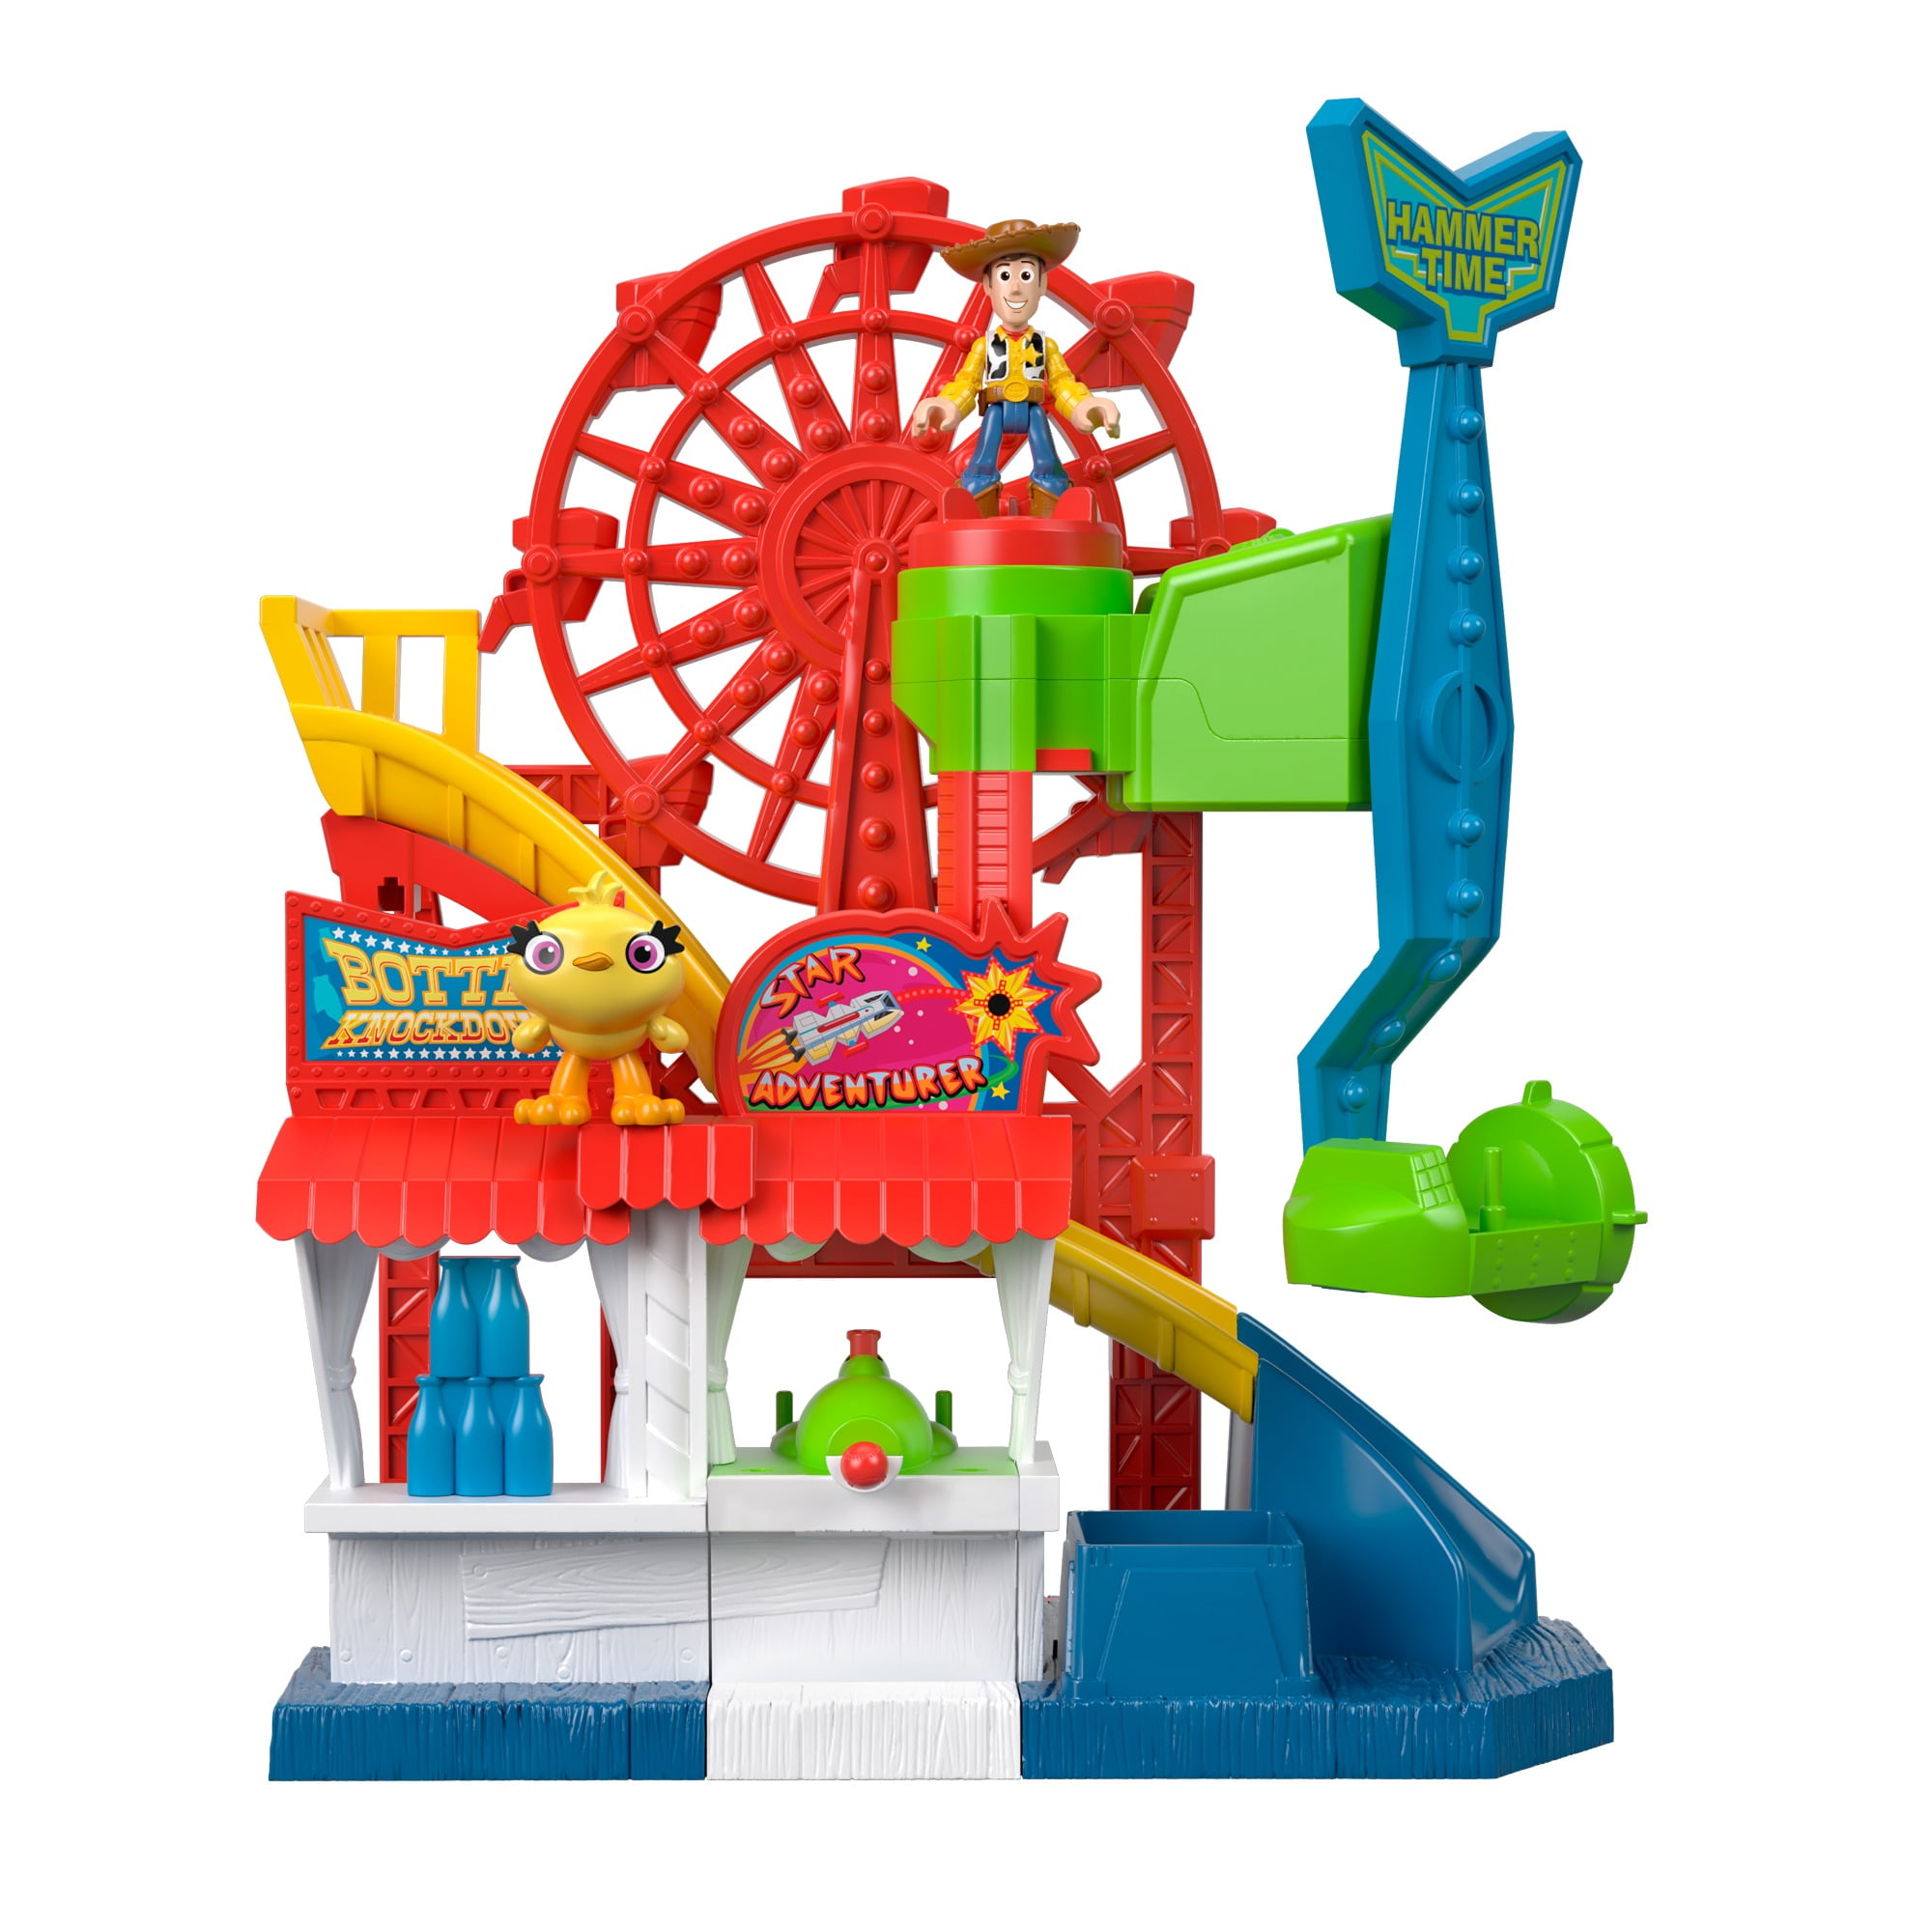 Imaginext Disney Pixar Toy Story Carnival Playset with Woody & Ducky